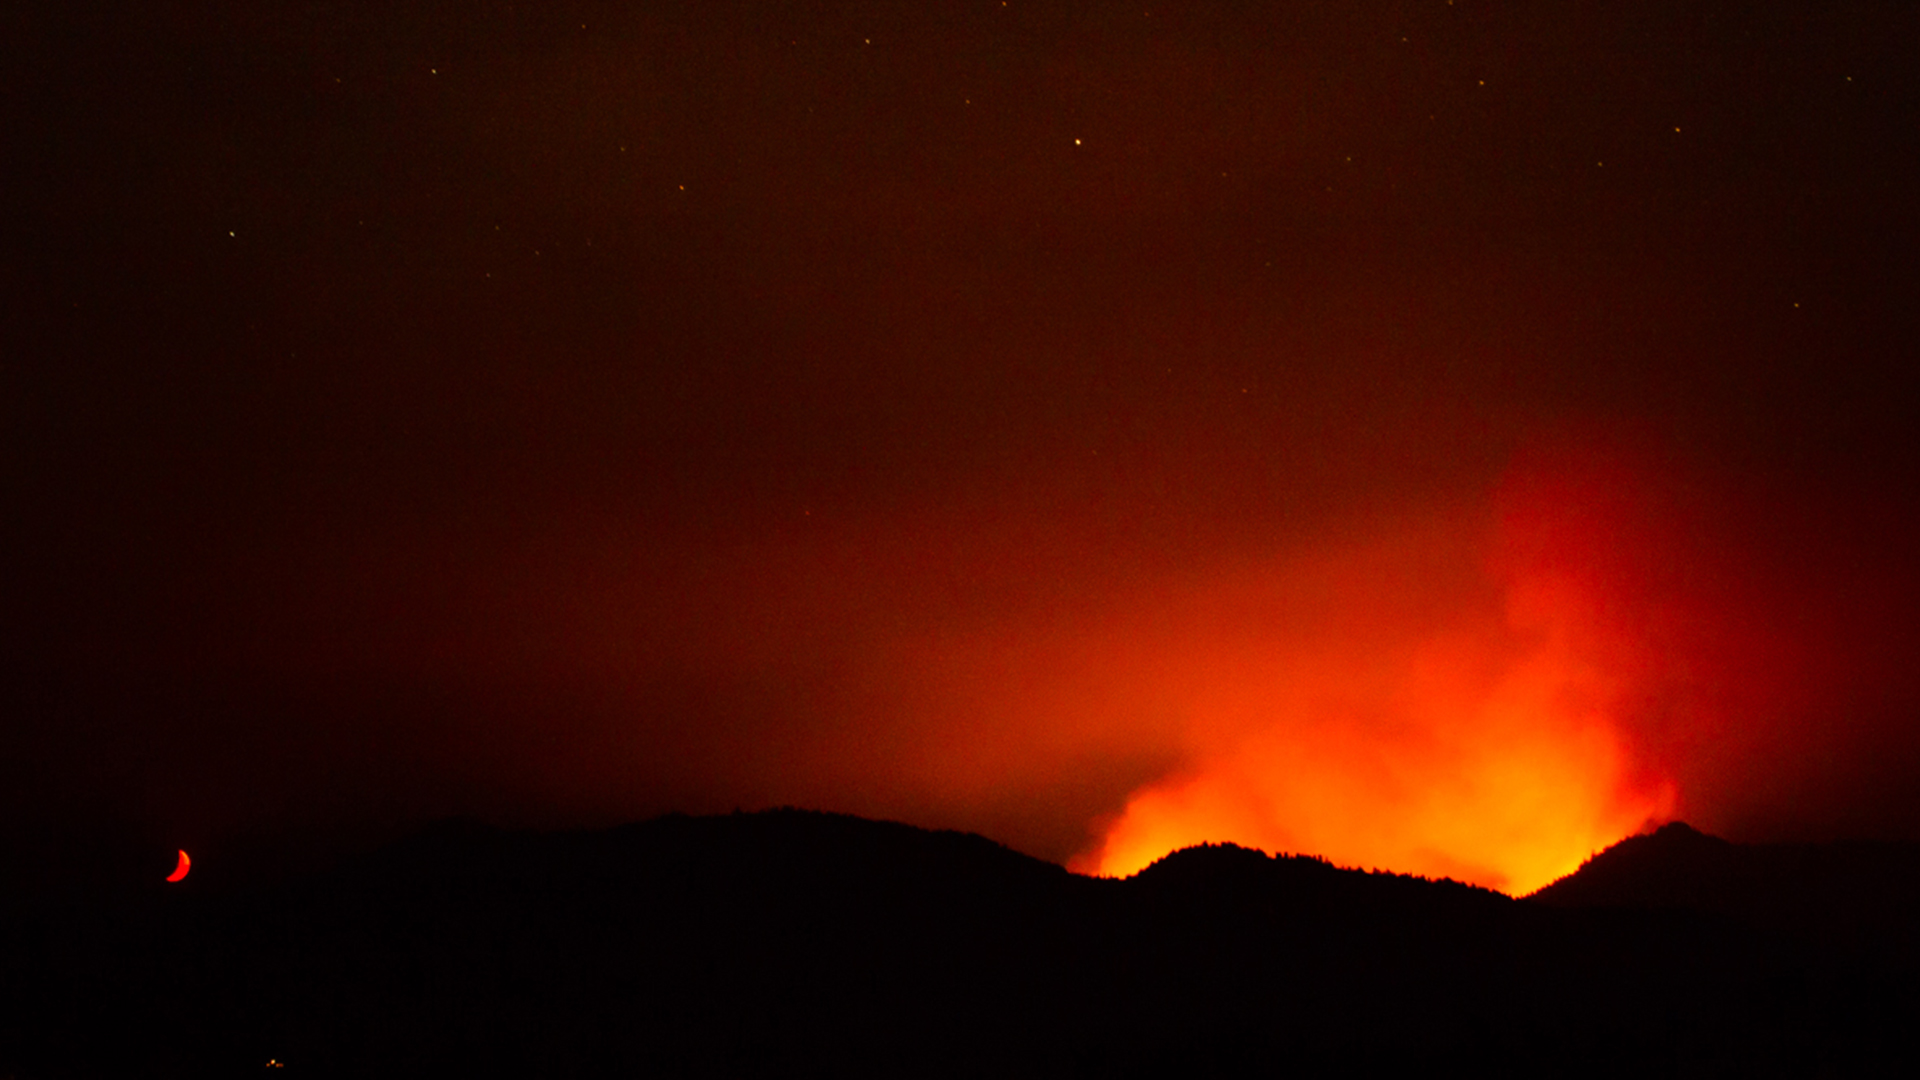 a forest fire at night, long exposure, the moon glows red like the smoke